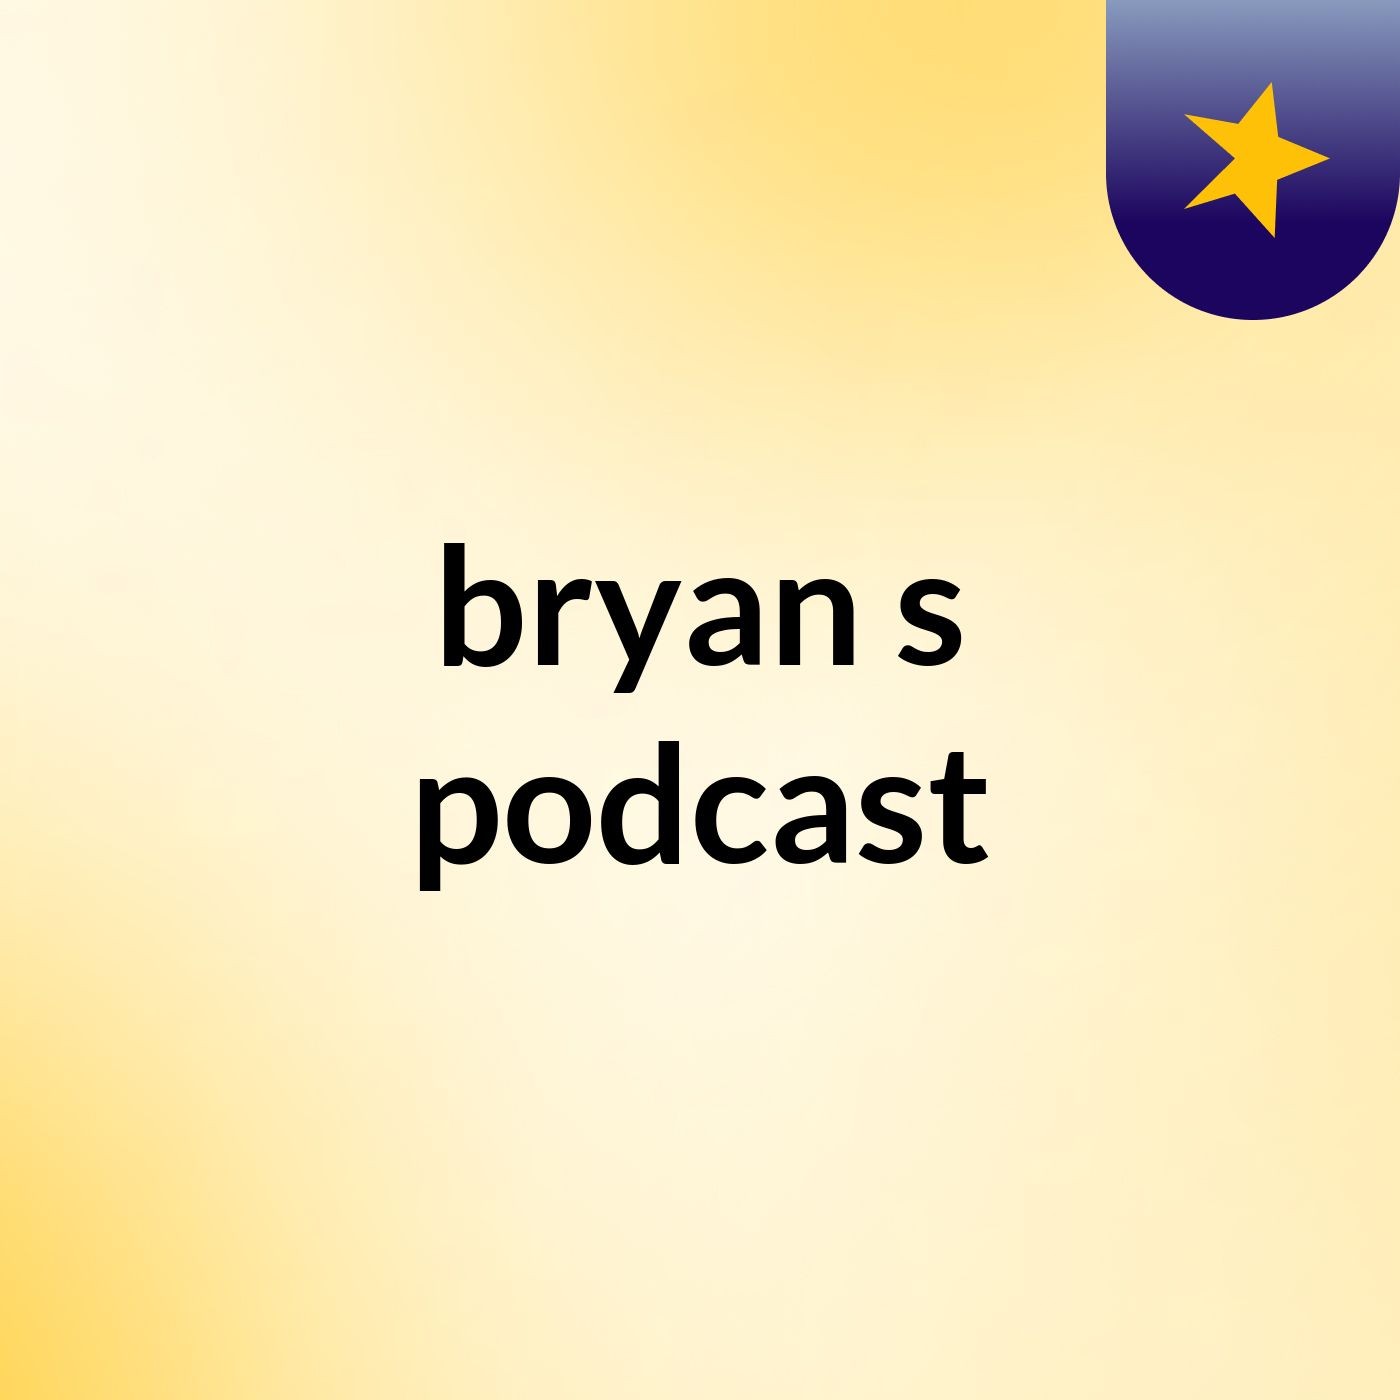 Episode 3 - bryan's podcast